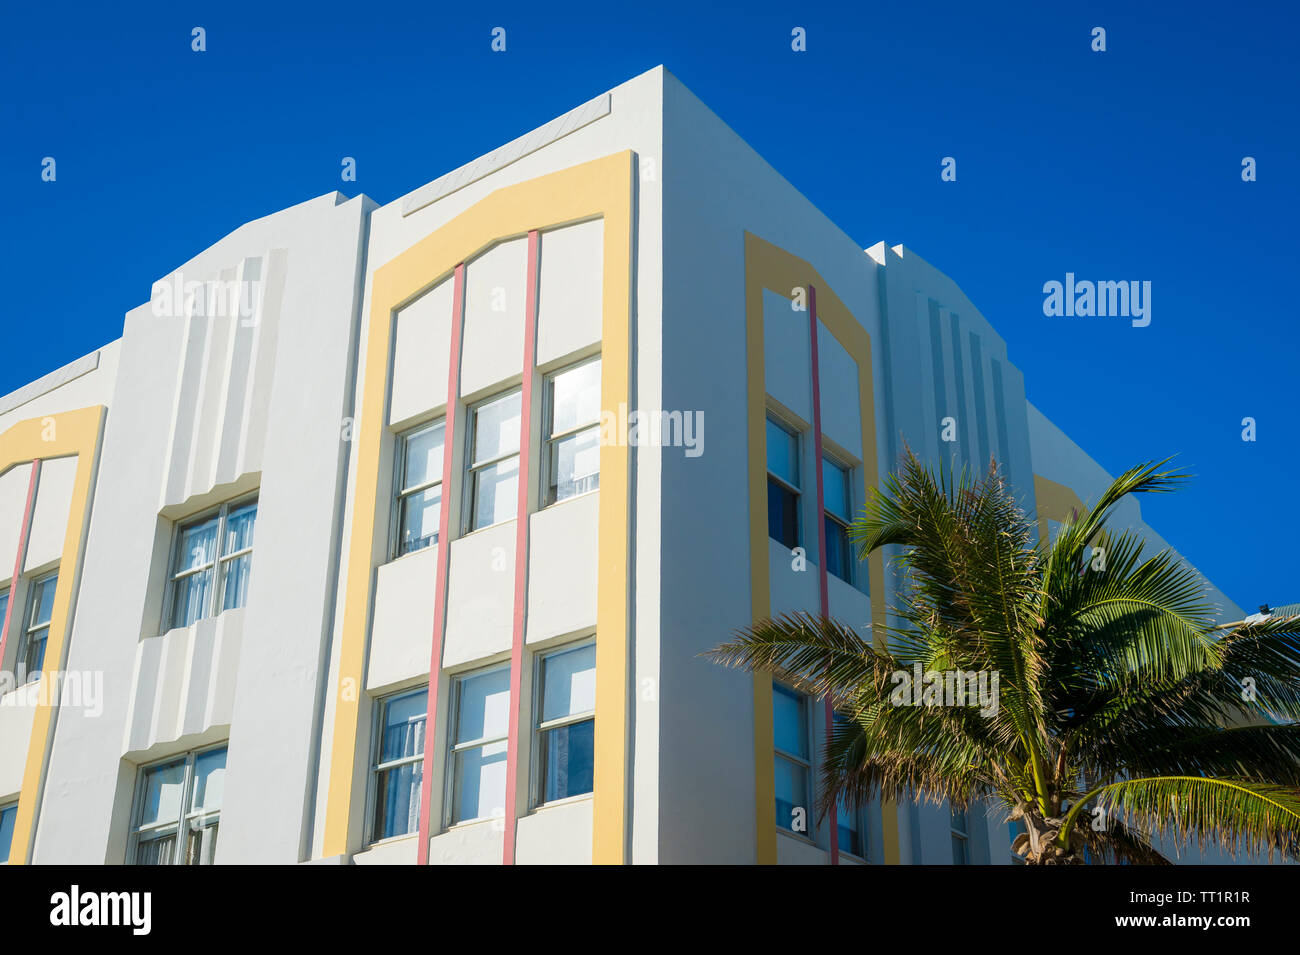 Detail close-up of typical colorful Art Deco architecture with tropical palm tree on Ocean Drive in South Beach, Miami, Florida Stock Photo